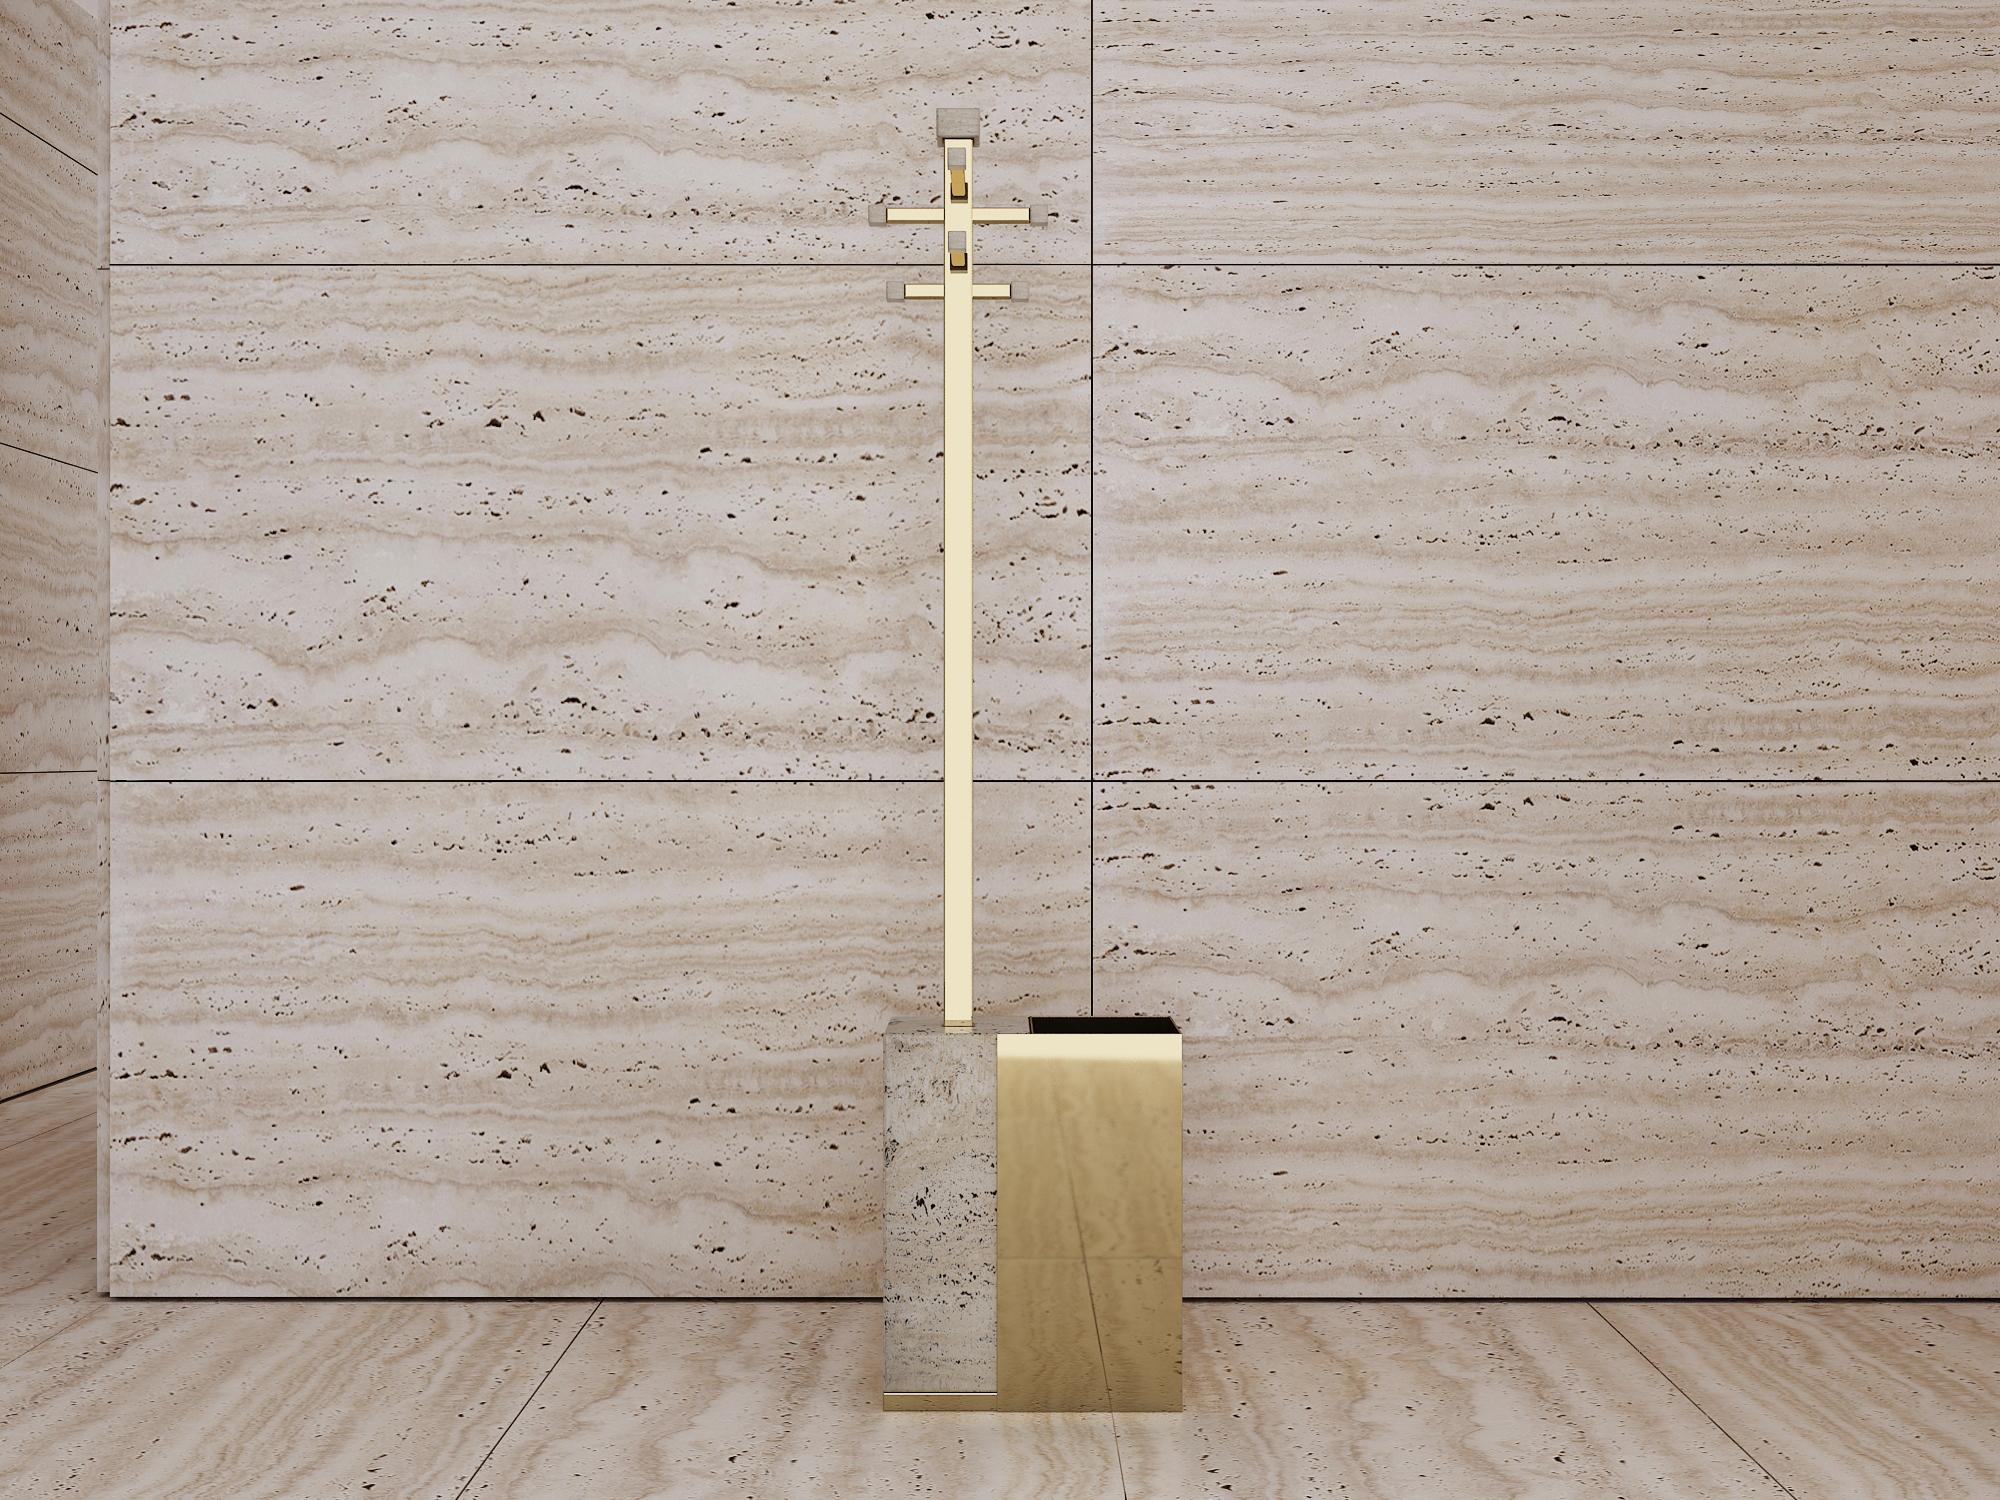 Hand polished solid brass and travertine coat stand & umbrella holder set. Items can be showcased together or separately.

Approximate individual dimensions:
Coat stand: W 20 x D 20 x H 178 cm
Umbrella holder: W 25 x D 20 x H 51 cm

All pieces are